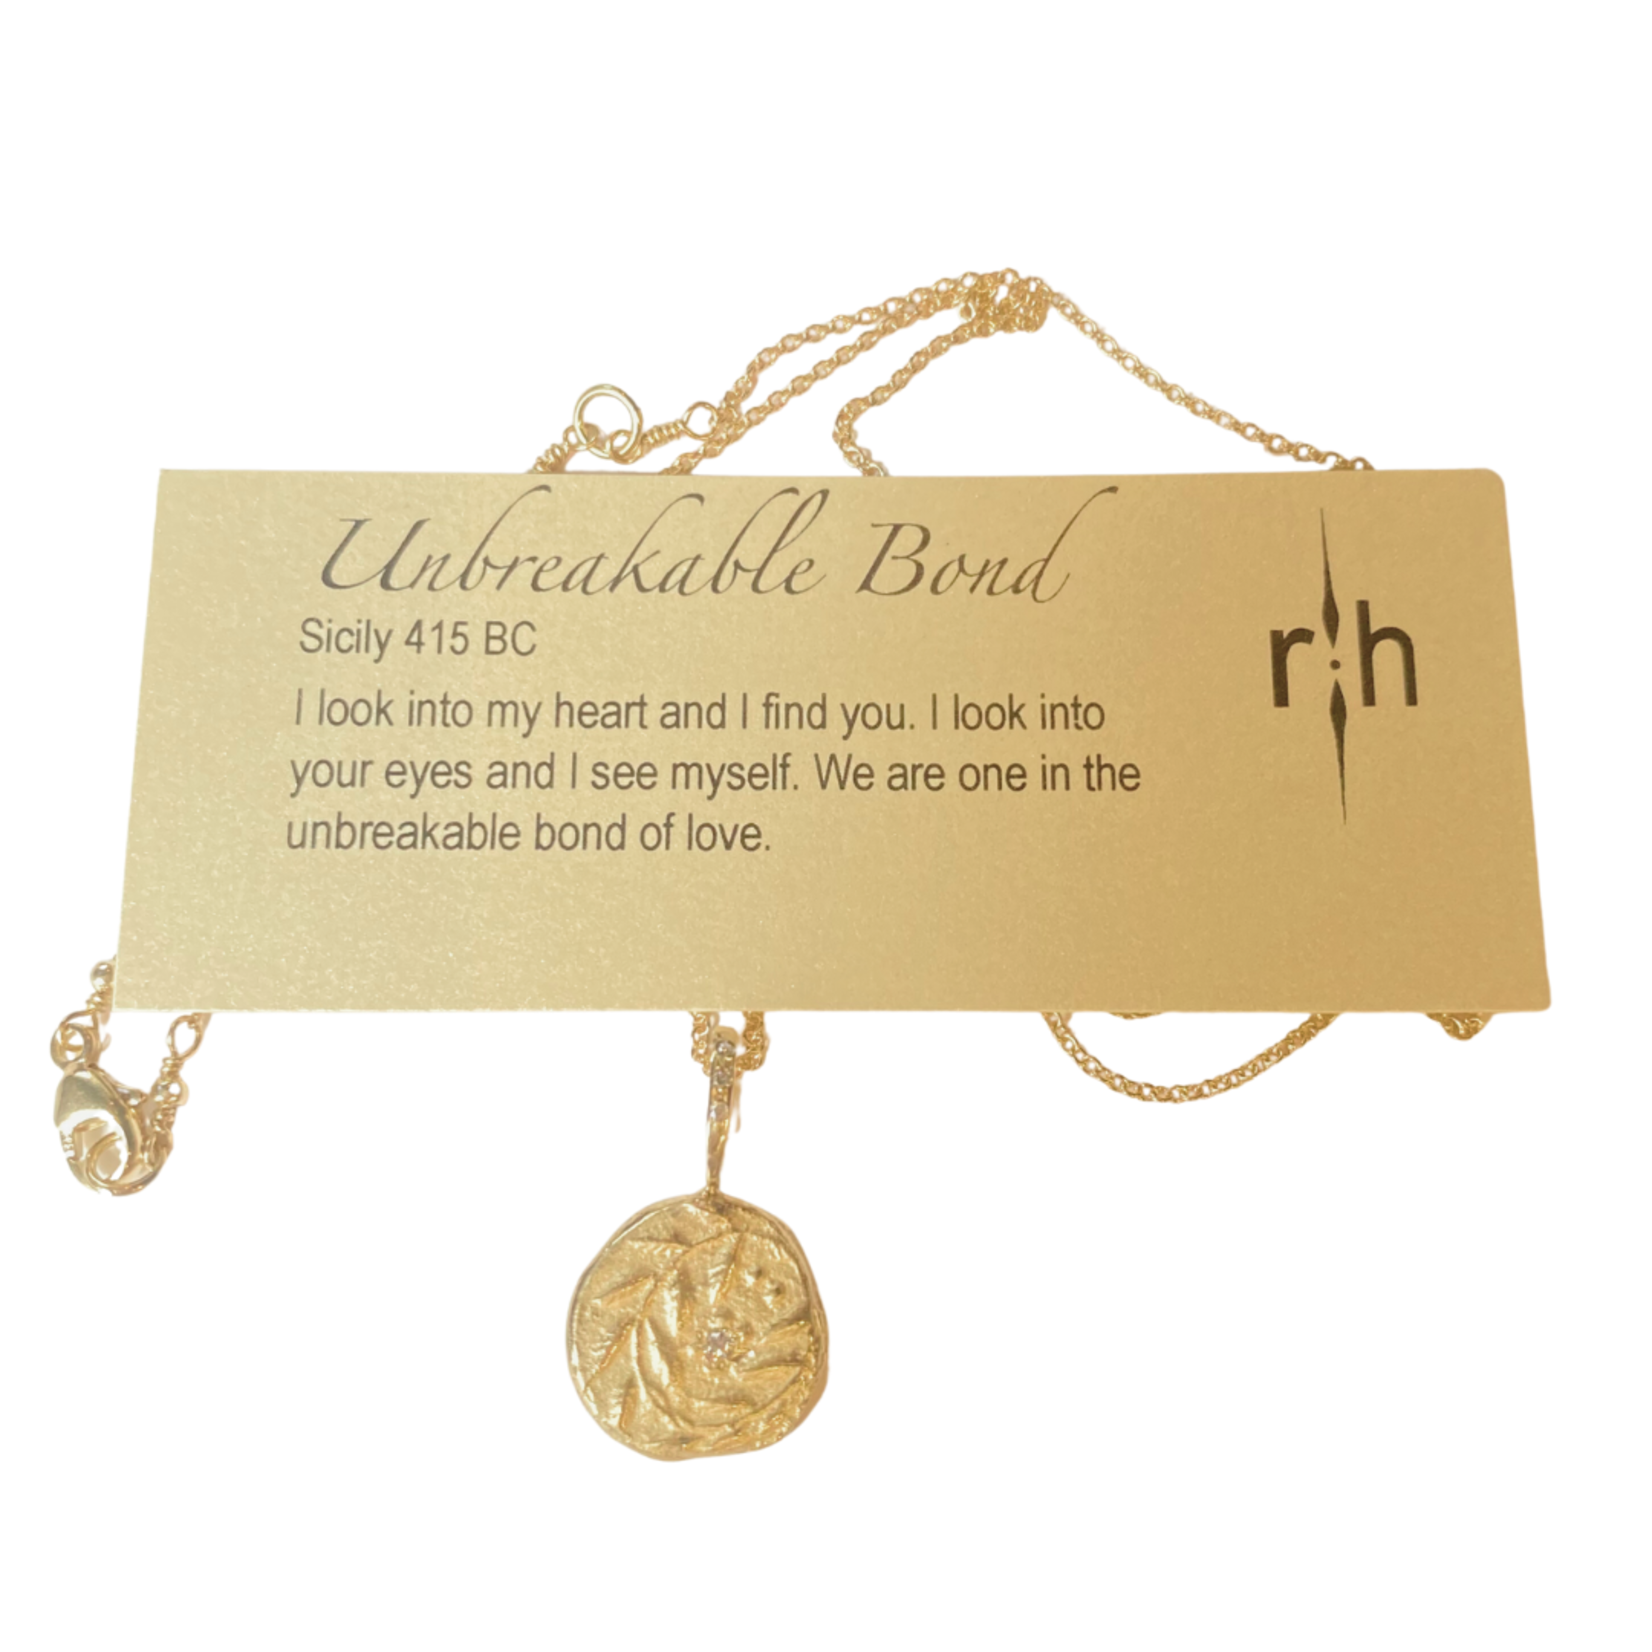 Robin Haley Jewelry Unbreakable Bond Artifact Necklace (14ky gold 16/18" chain)